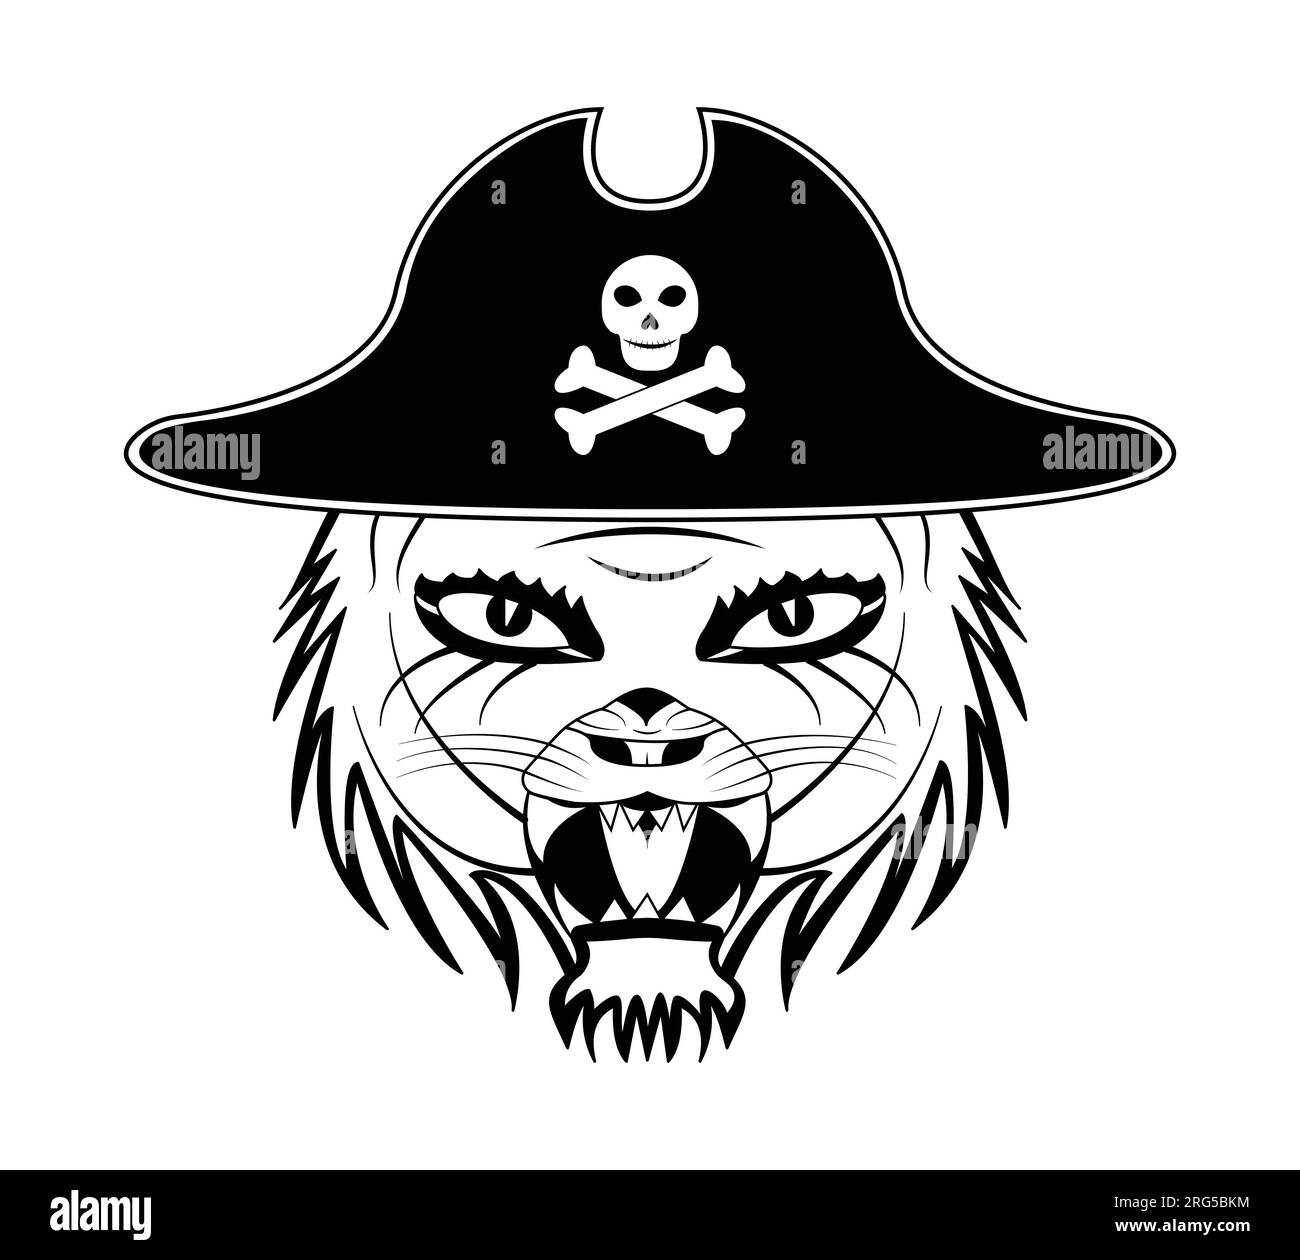 tiger face pirate icon. vectors, illustrations, icons, avatars and logos. Stock Vector